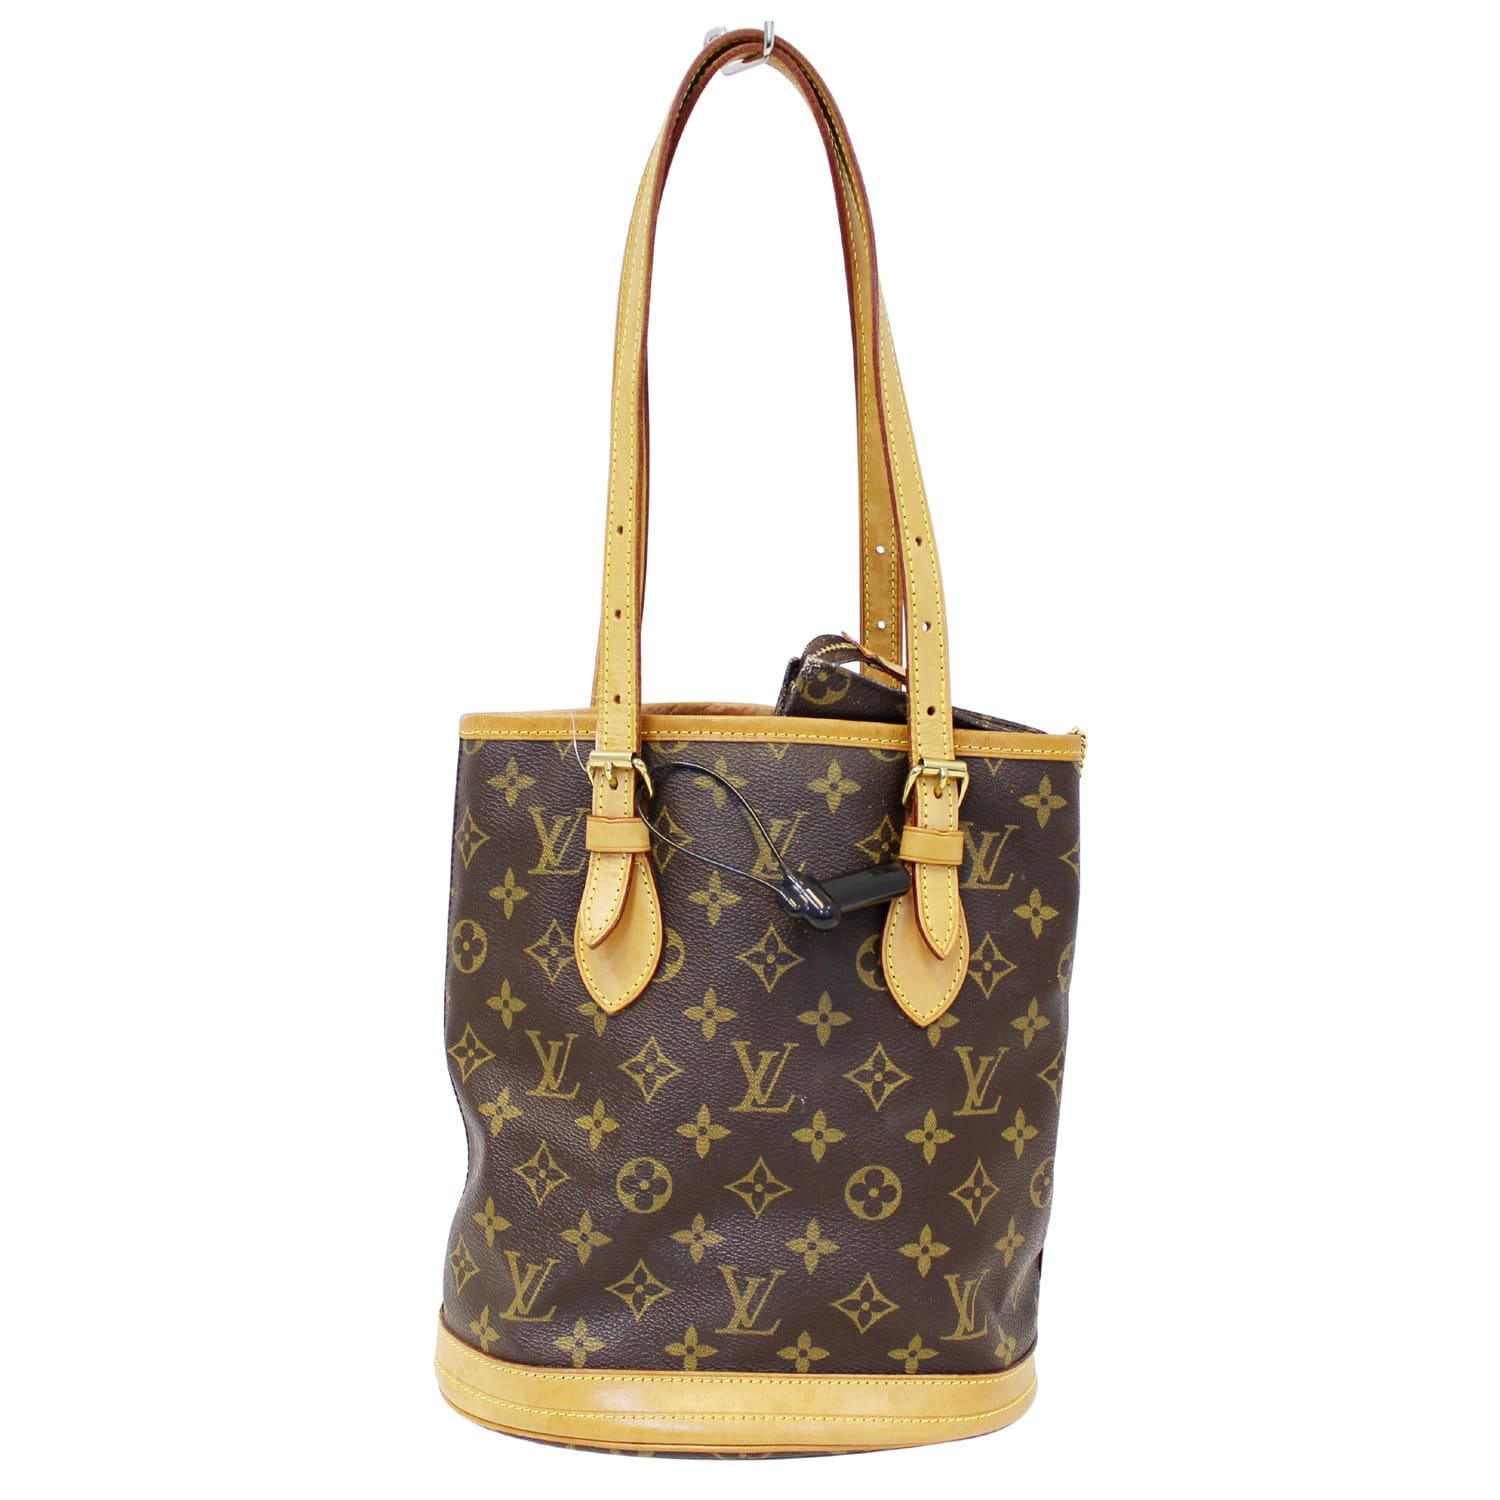 Best Replica Louis Vuitton Bucket Tote Multicolored Bag With